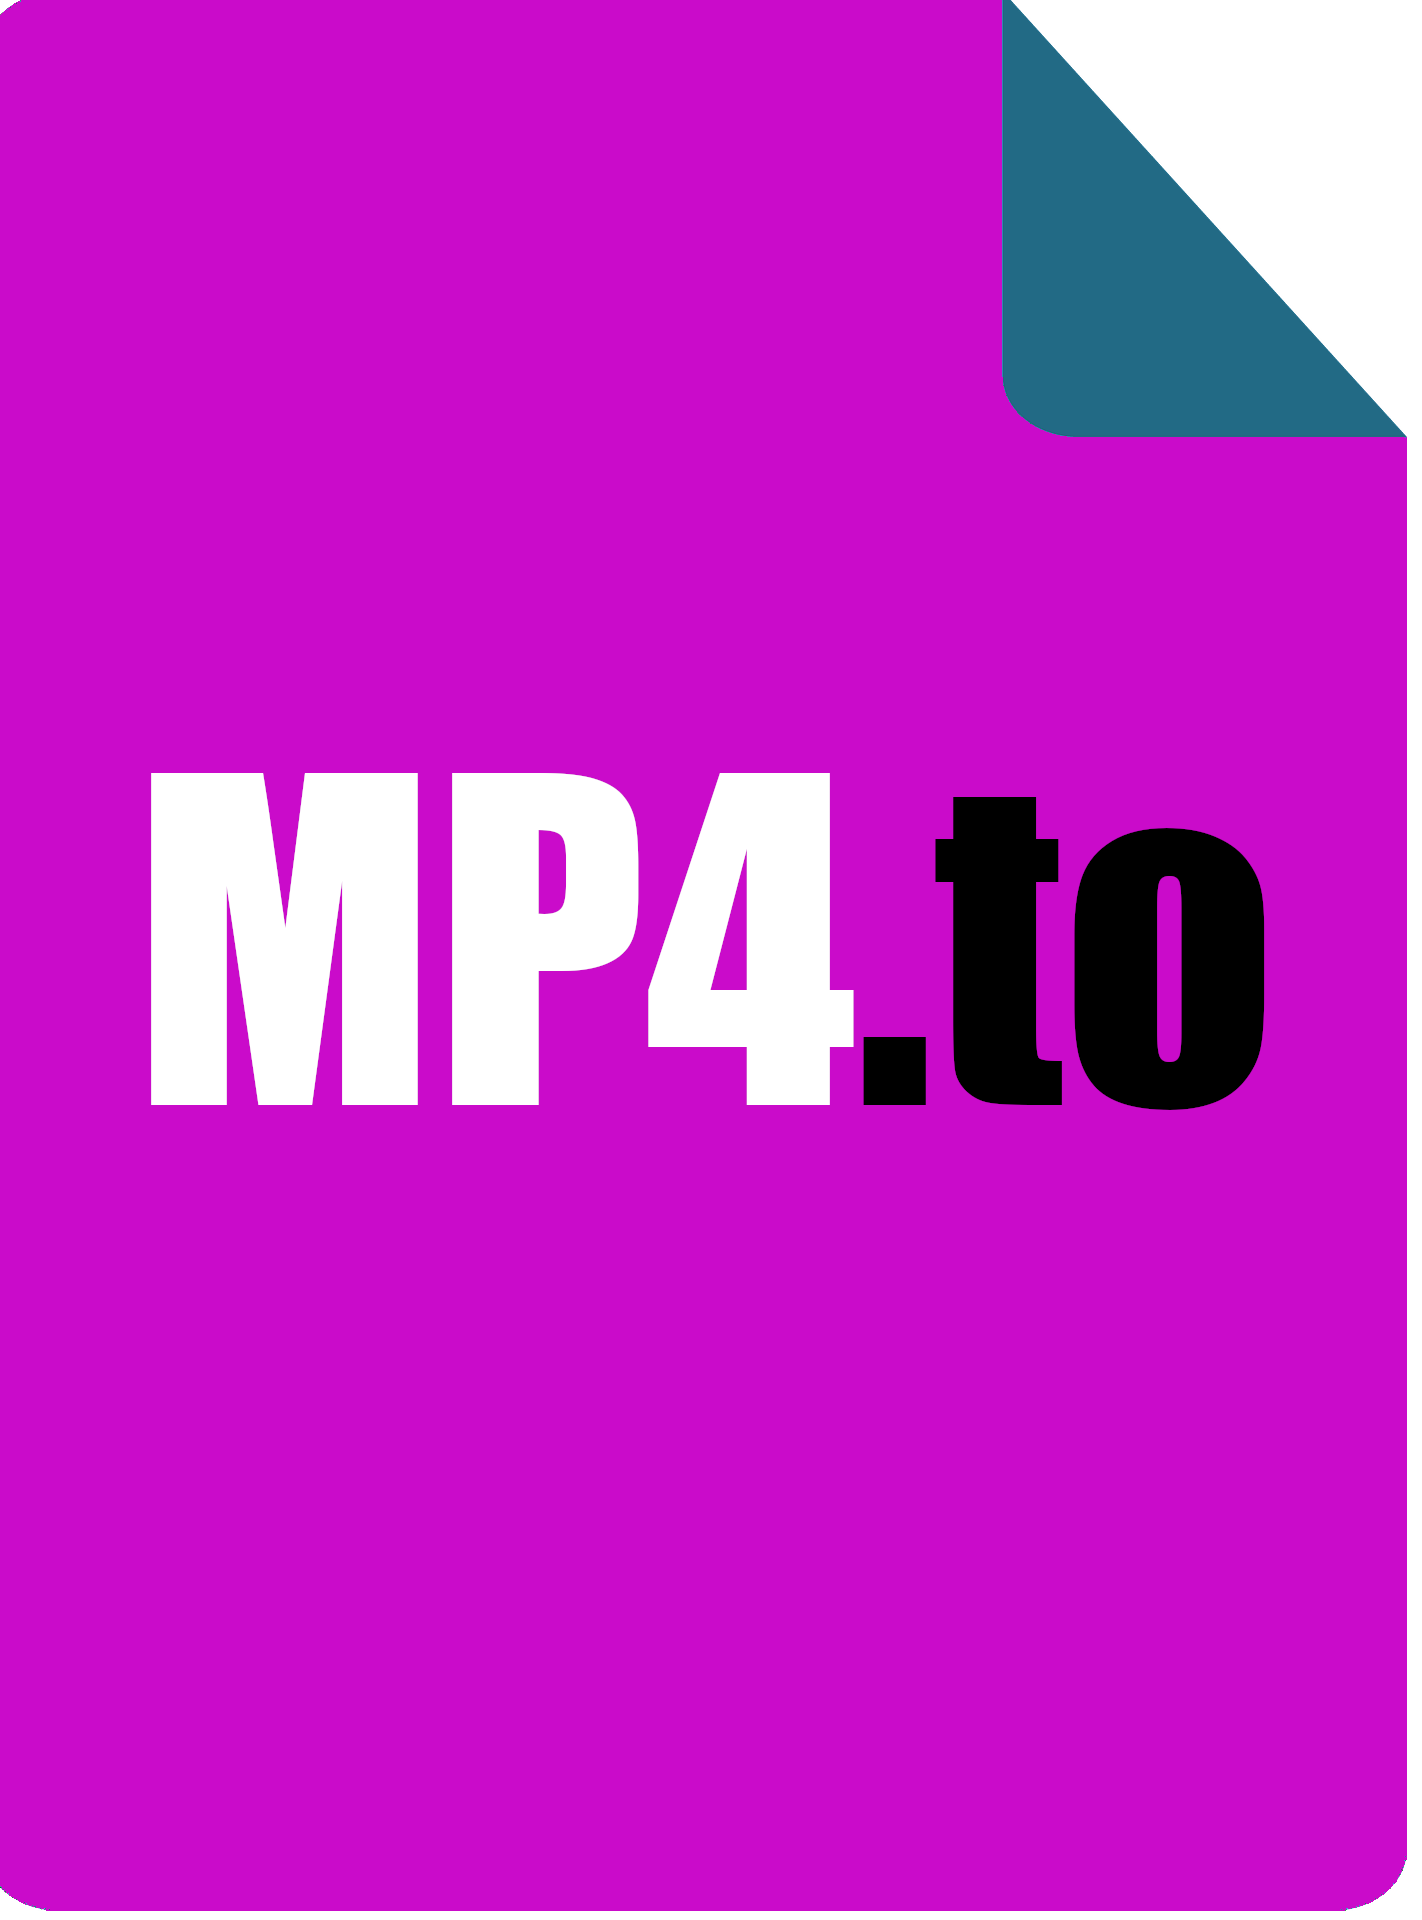 MP4 to WEBP